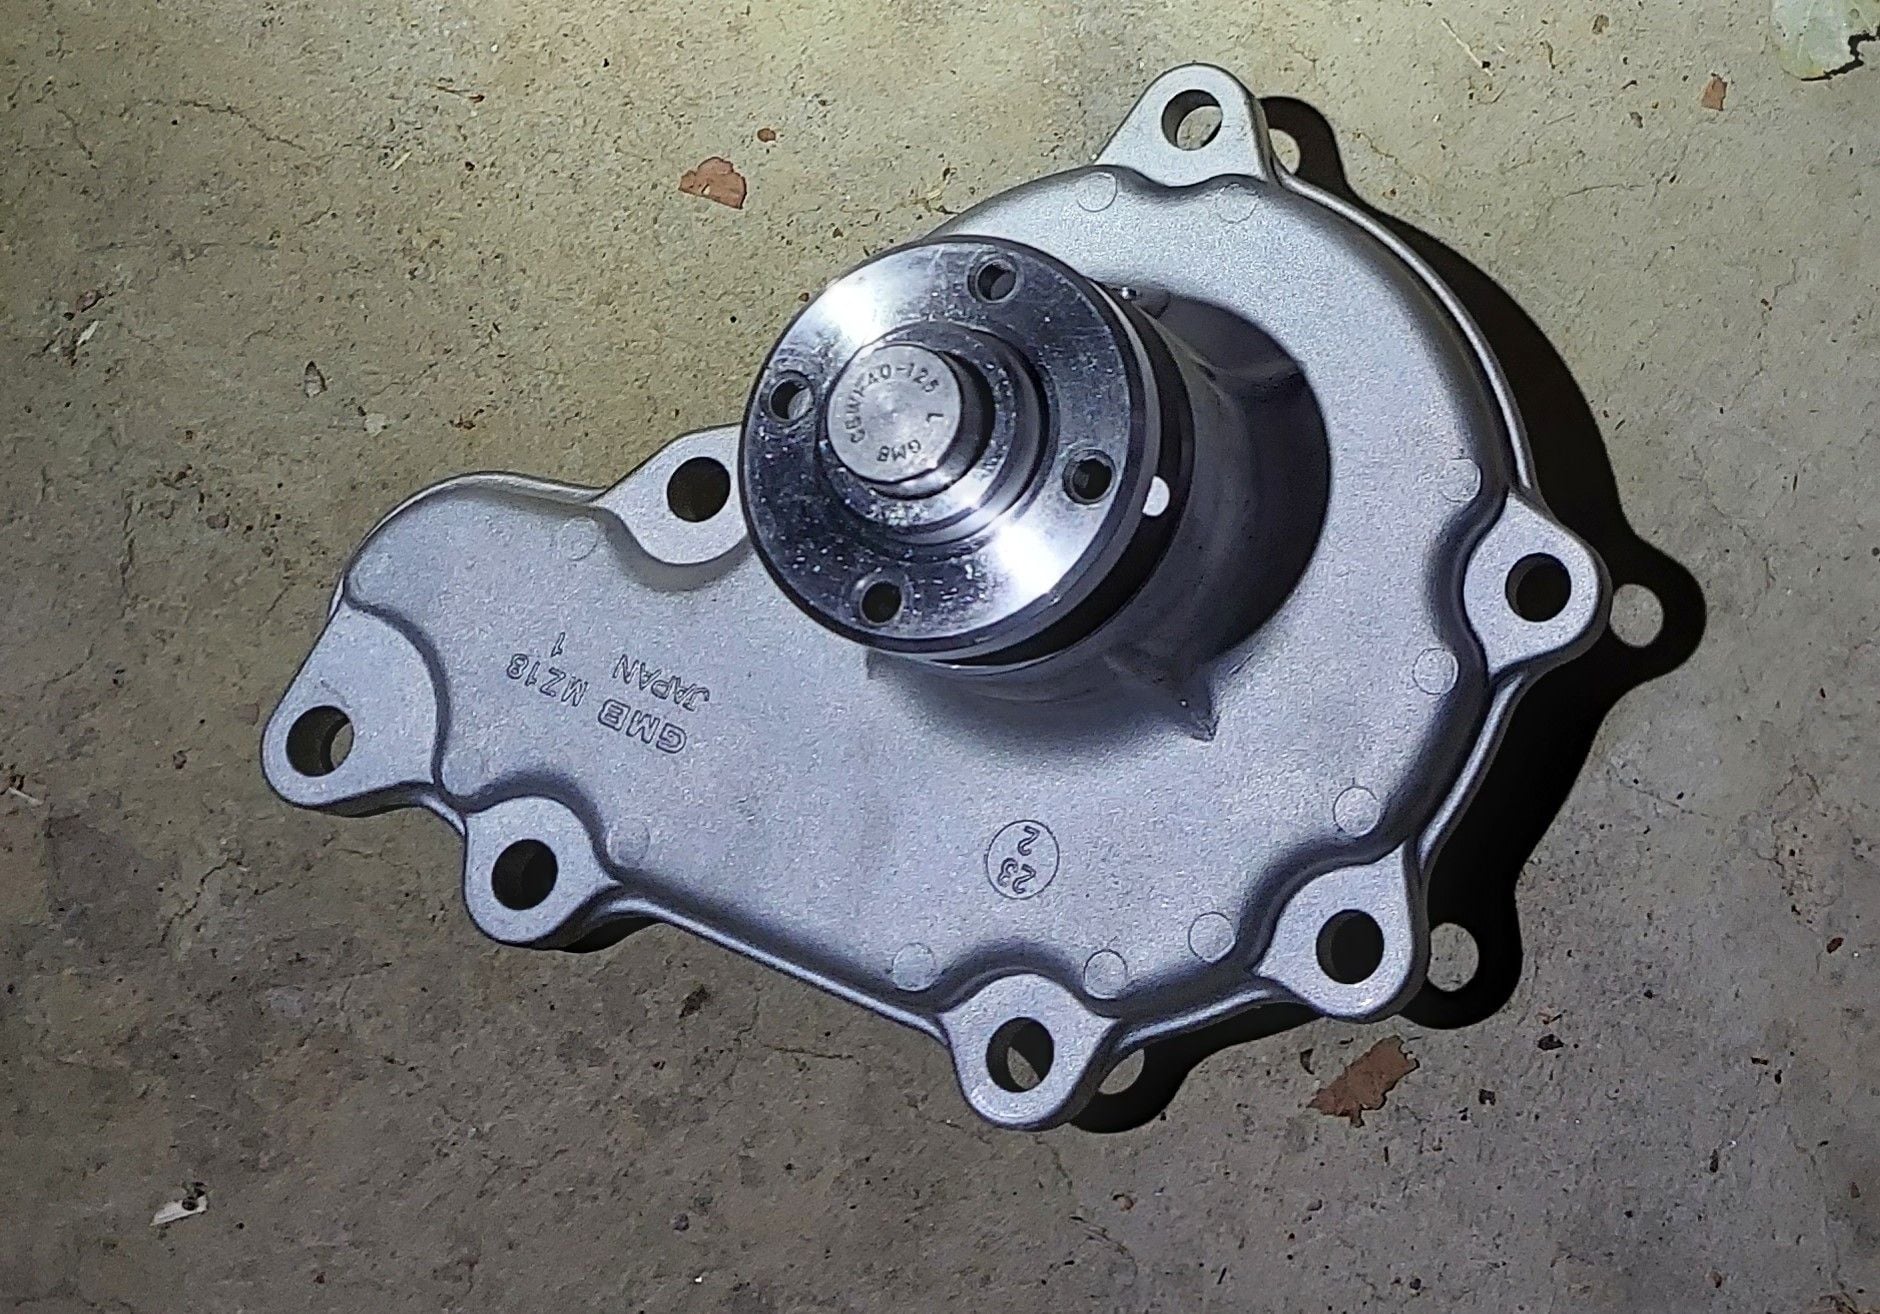 Drivetrain - First Gen 12A/13B Water pump, gasket, thermostat gasket, and housing to block gasket. - New - 1979 to 1985 Mazda RX-7 - Cordova, TN 38018, United States